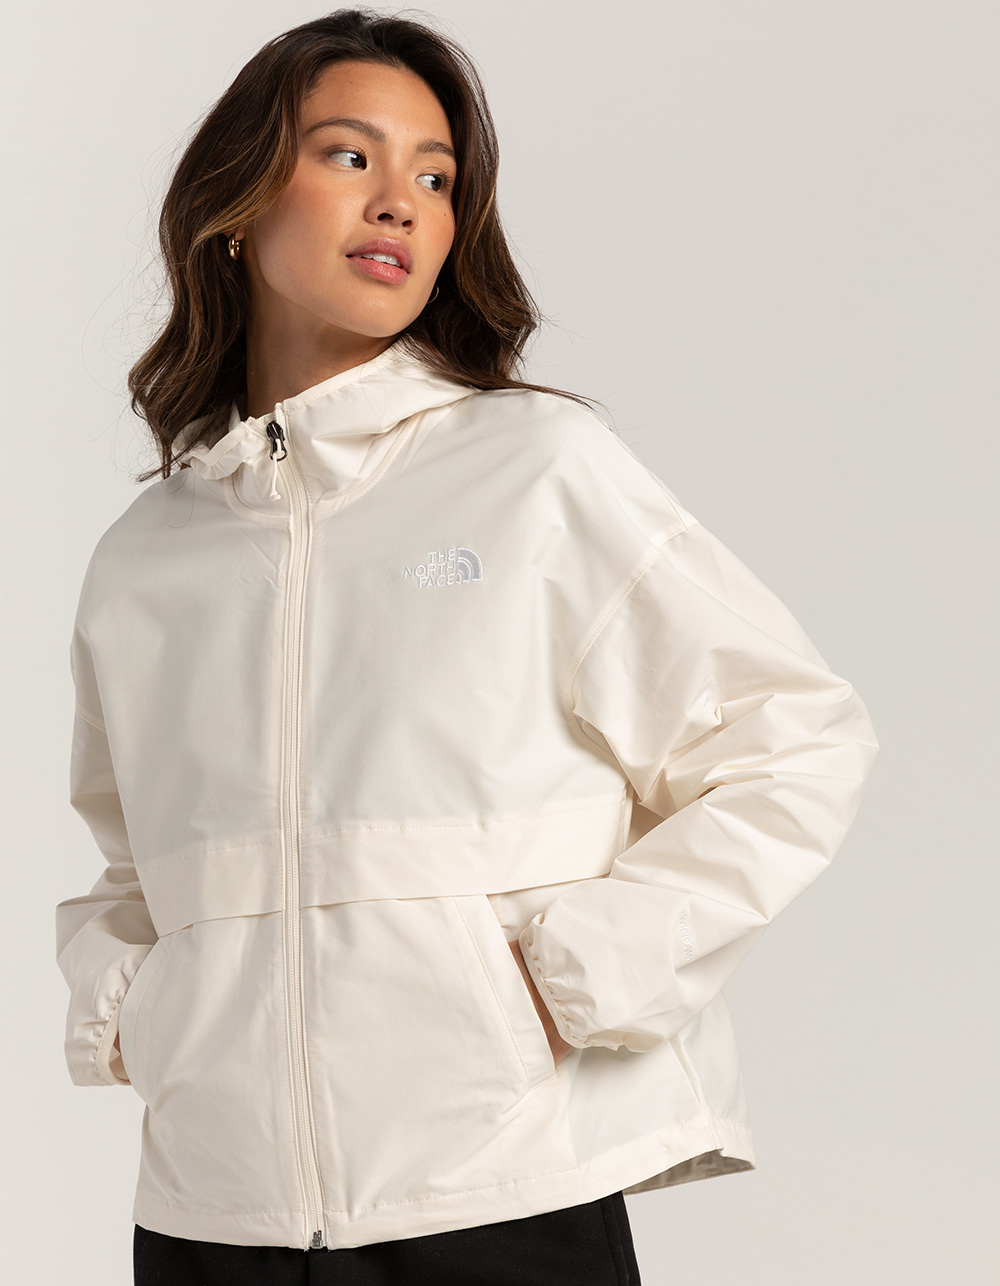 THE NORTH FACE Easy Wind Womens Jacket